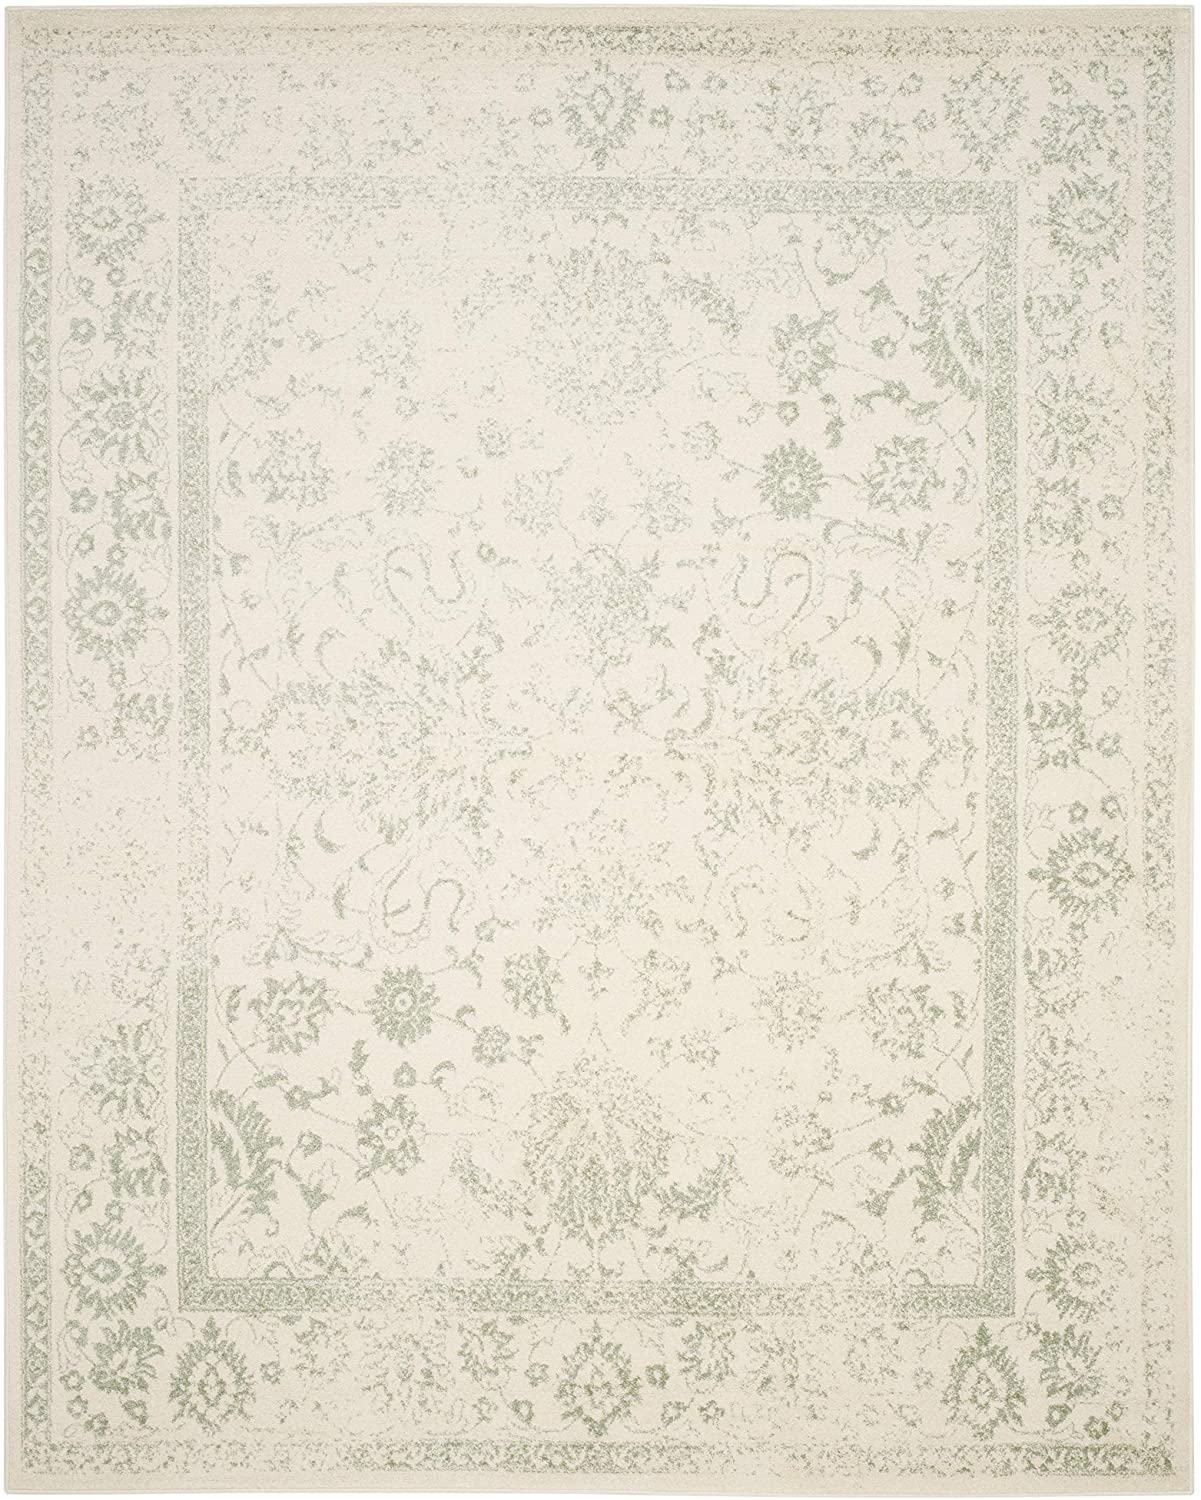 Safavieh Adirondack Collection ADR109C Oriental Distressed Non-Shedding Stain Resistant Living Room Bedroom Runner, 2'6" x 18' , Ivory / Silver